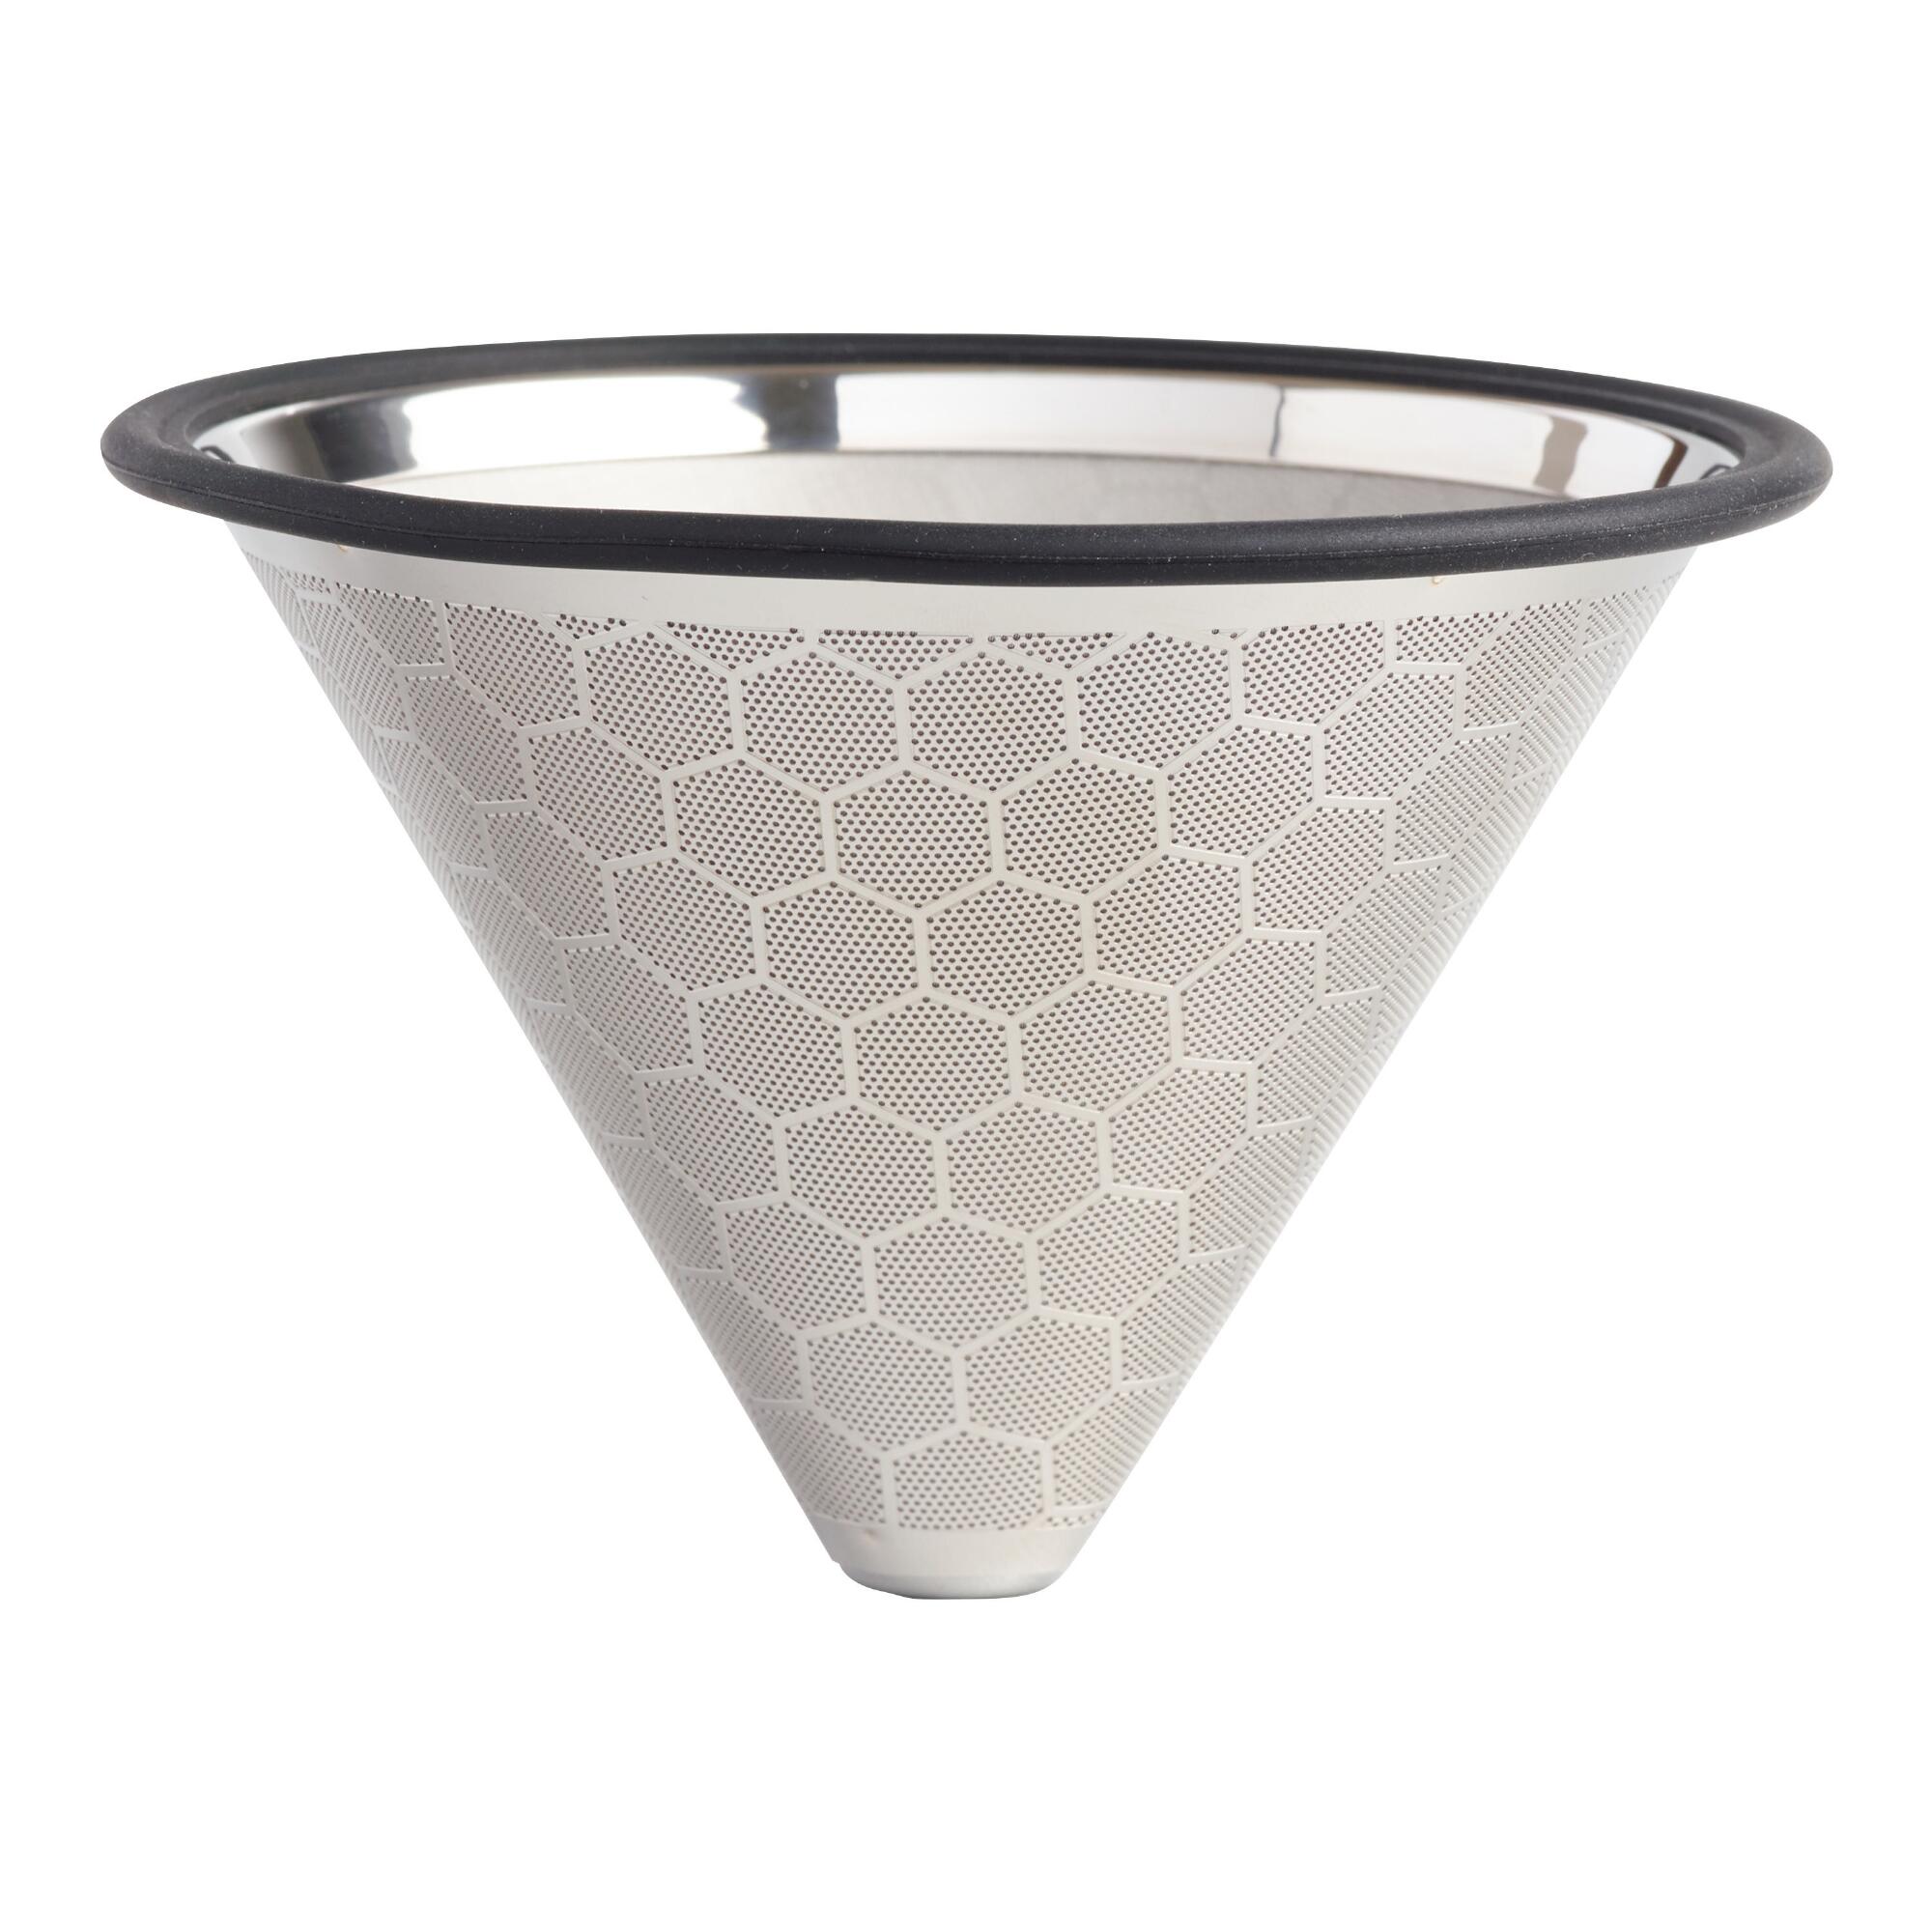 Stainless Steel Cone Pour Over Coffee Filter by World Market